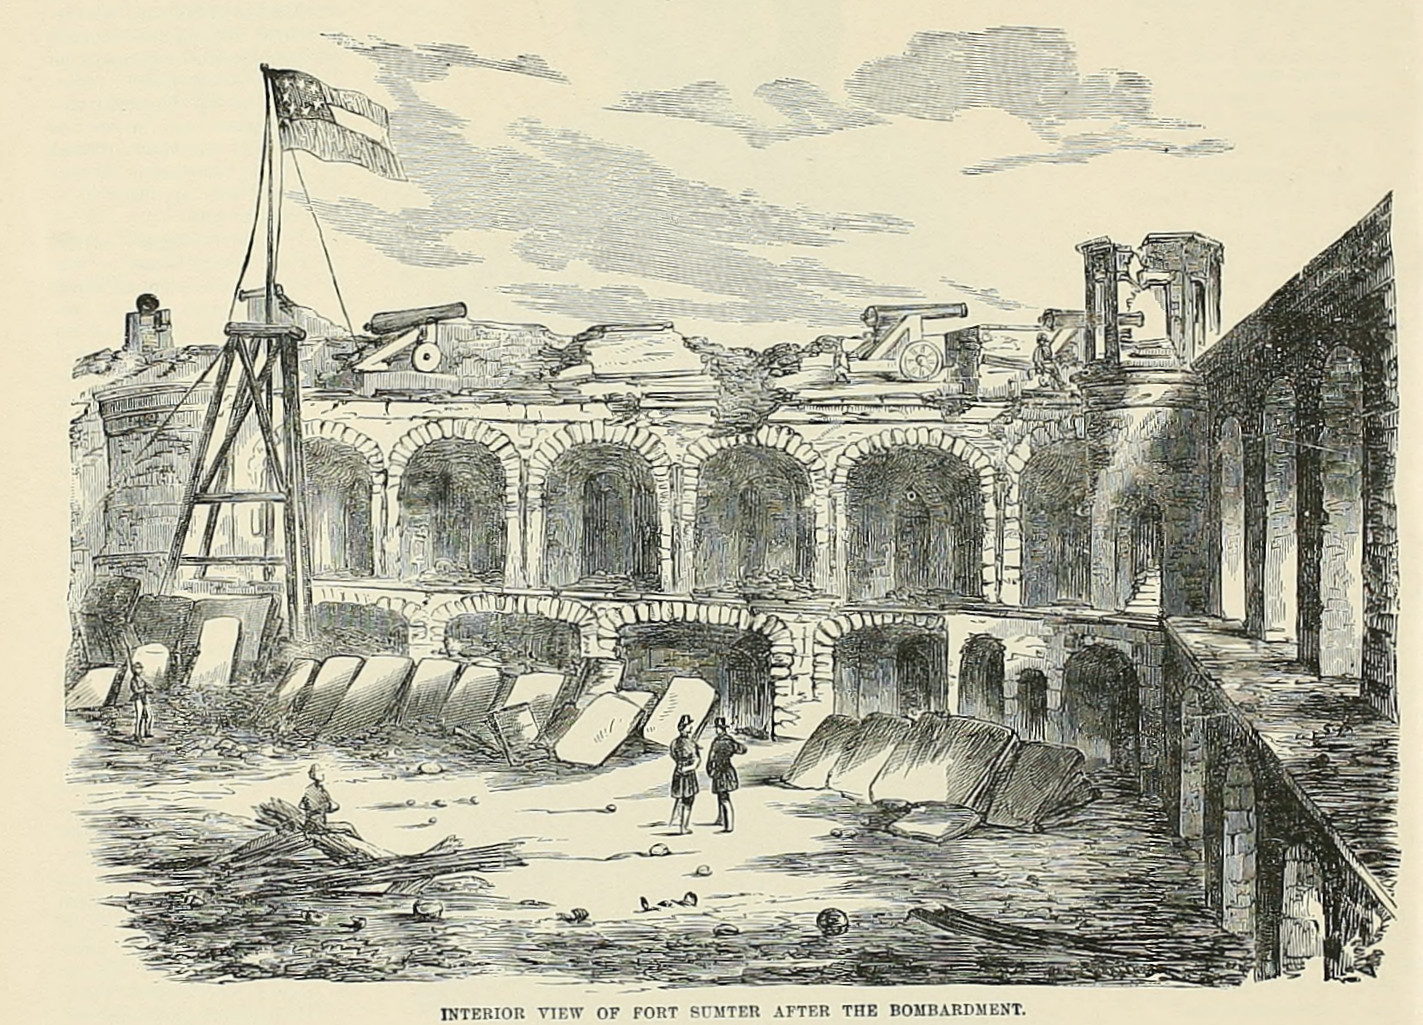 Interior View of Fort Sumter after the Bombardment